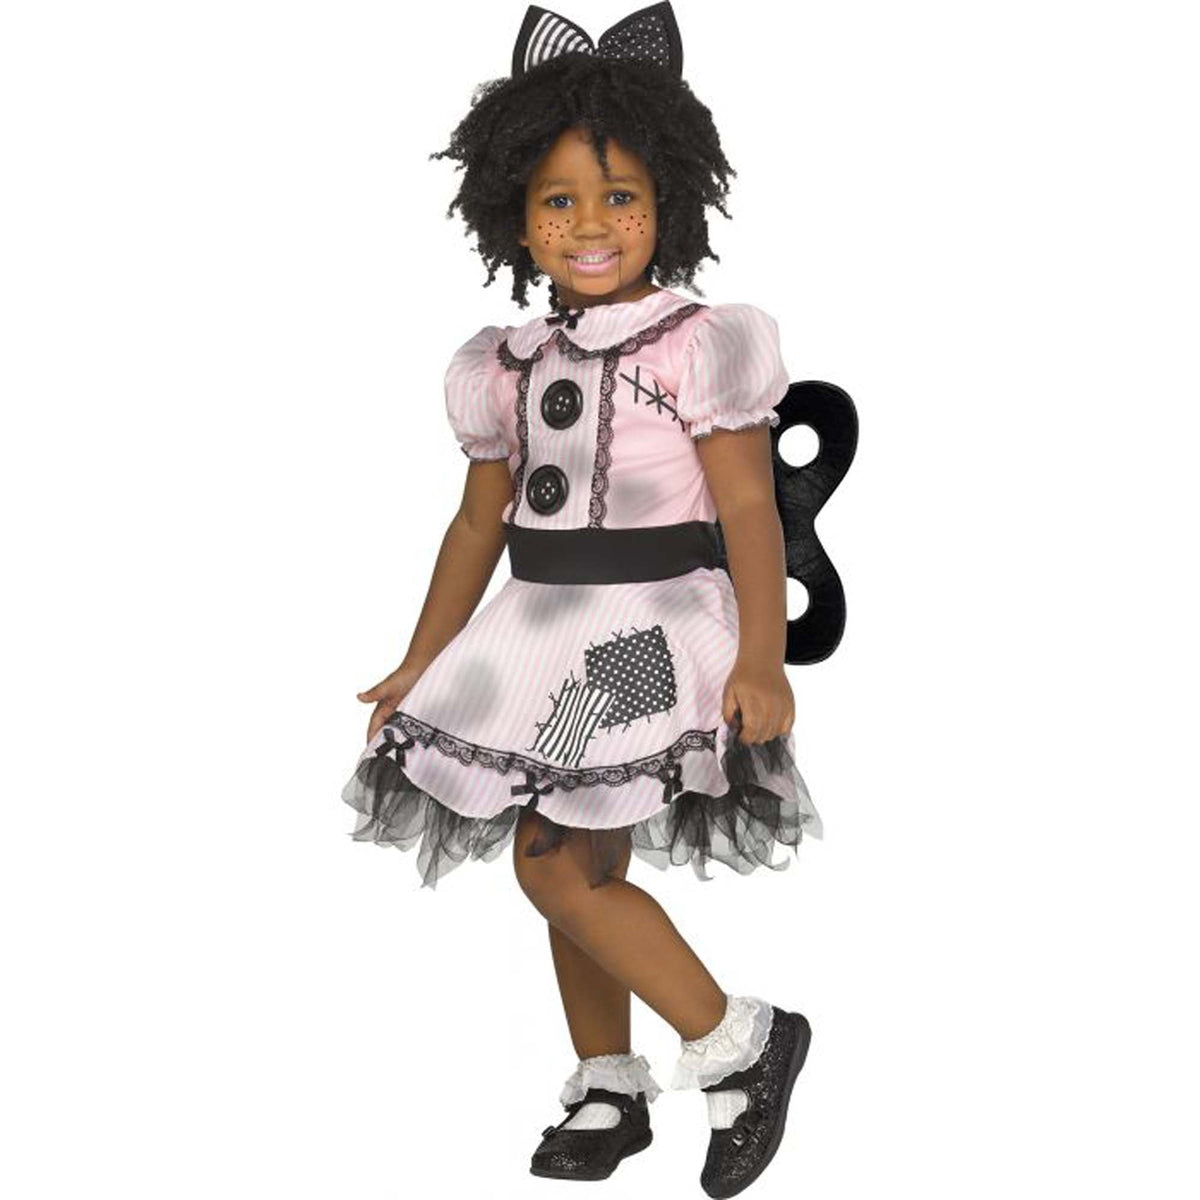 FUN WORLD Costumes Wind-Up Doll Costume for Toddlers, Pink and Black Dress